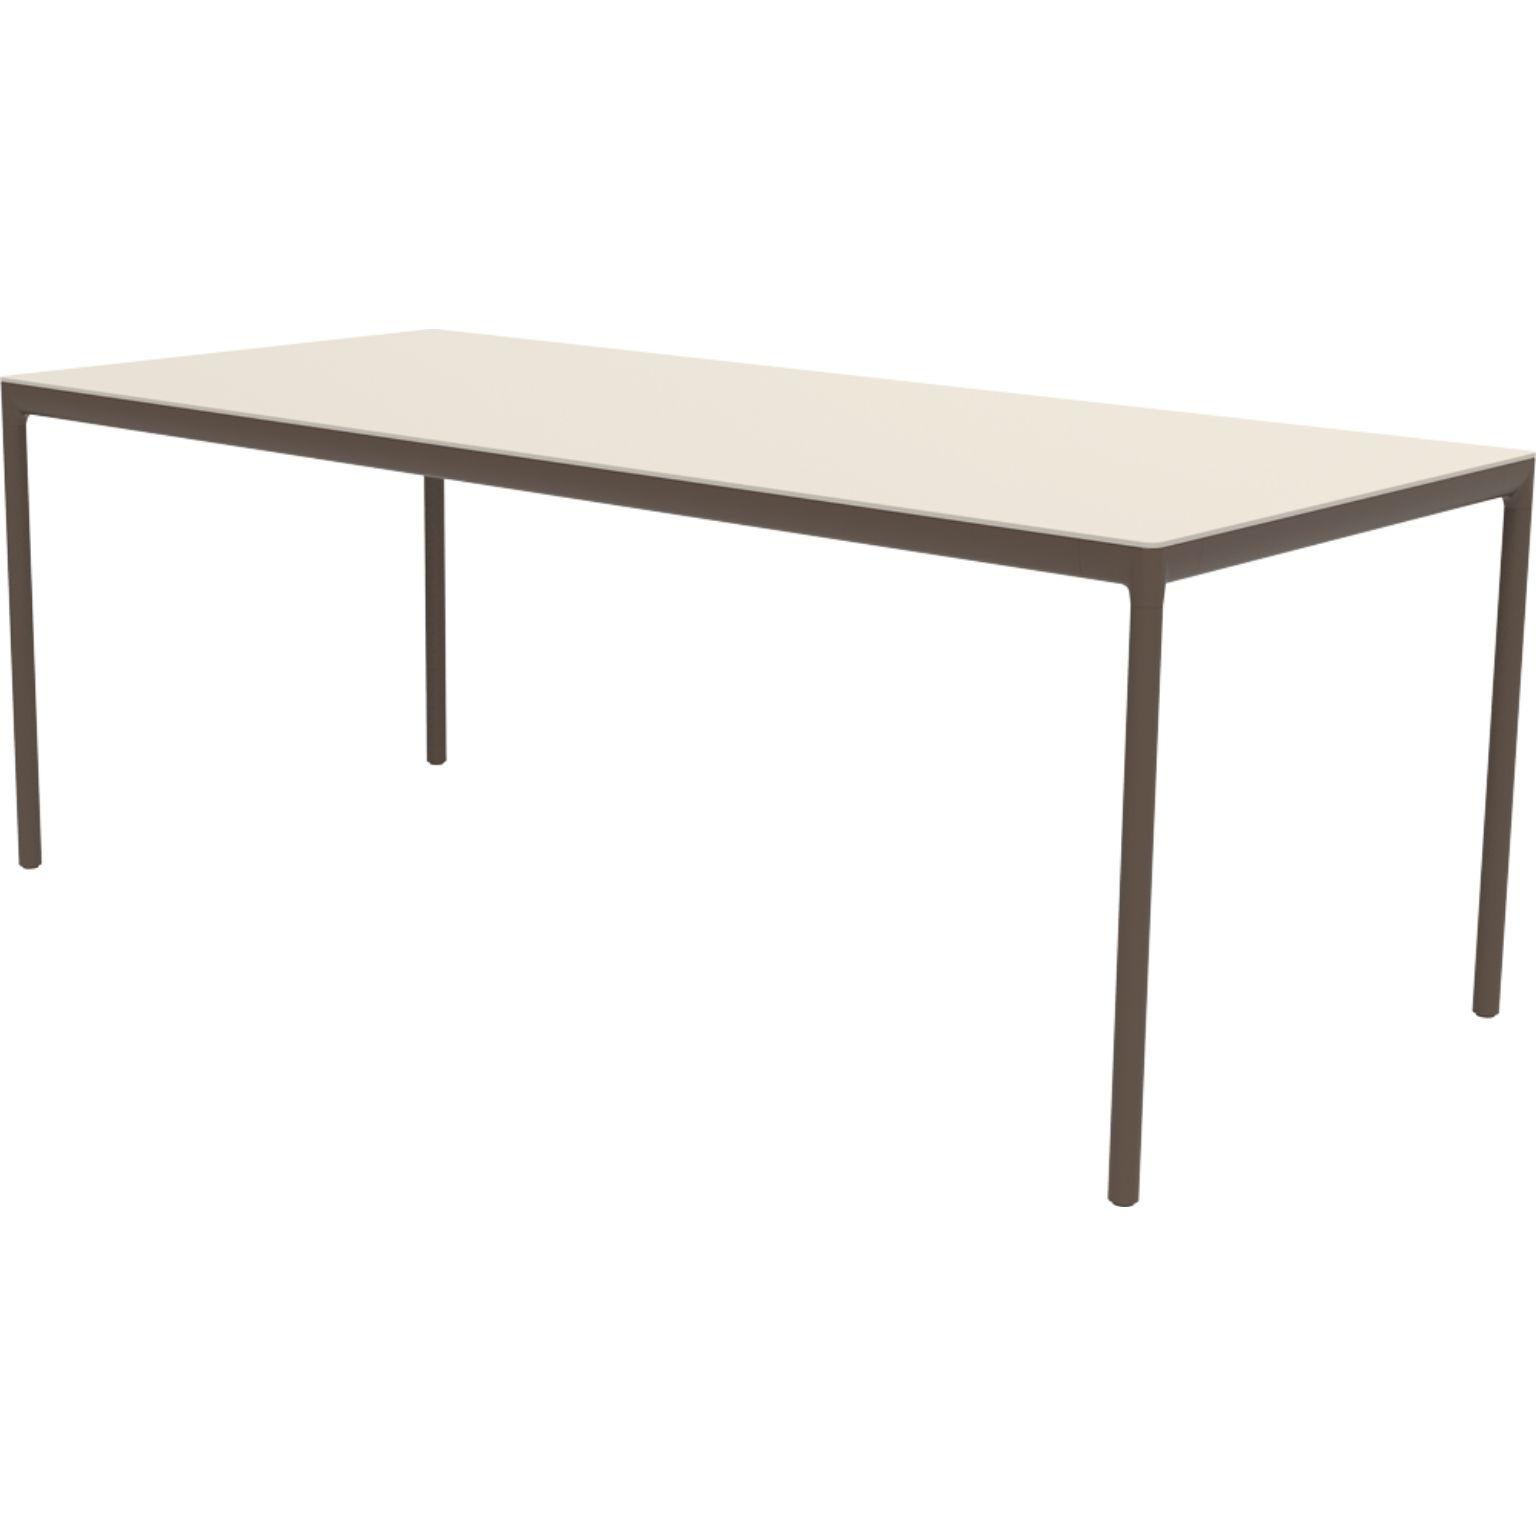 Ribbons Bronze 200 coffee table by MOWEE
Dimensions: D90 x W200 x H75 cm.
Material: Aluminum and HPL top.
Weight: 25 kg.
Also available in different colors and finishes. (HPL Black Edge or Neolith top). 

An unmistakable collection for its